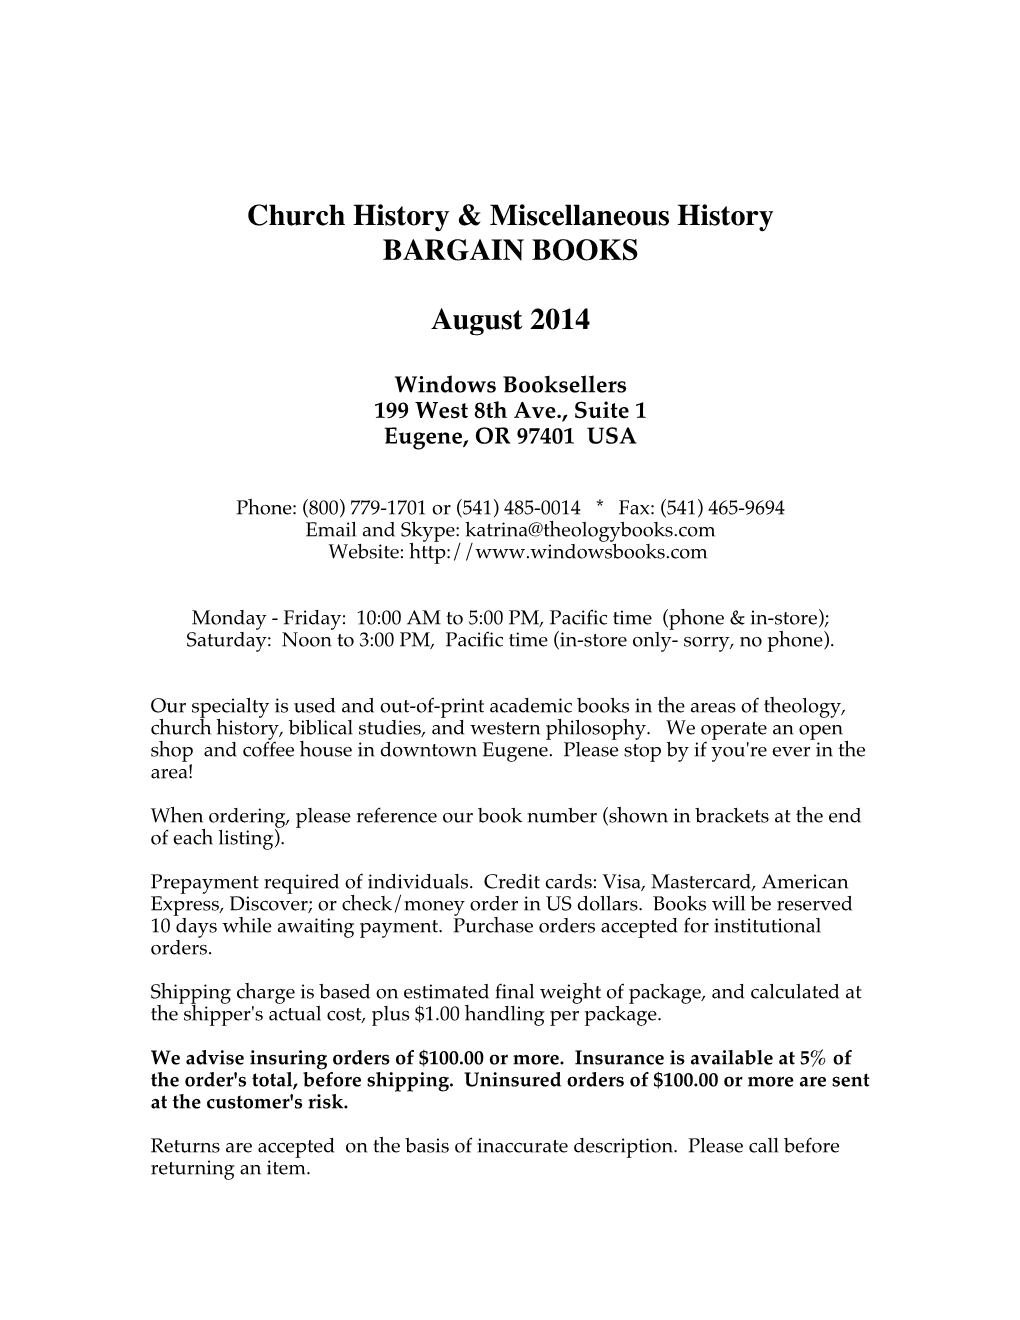 Church History & Misc. History, August2014